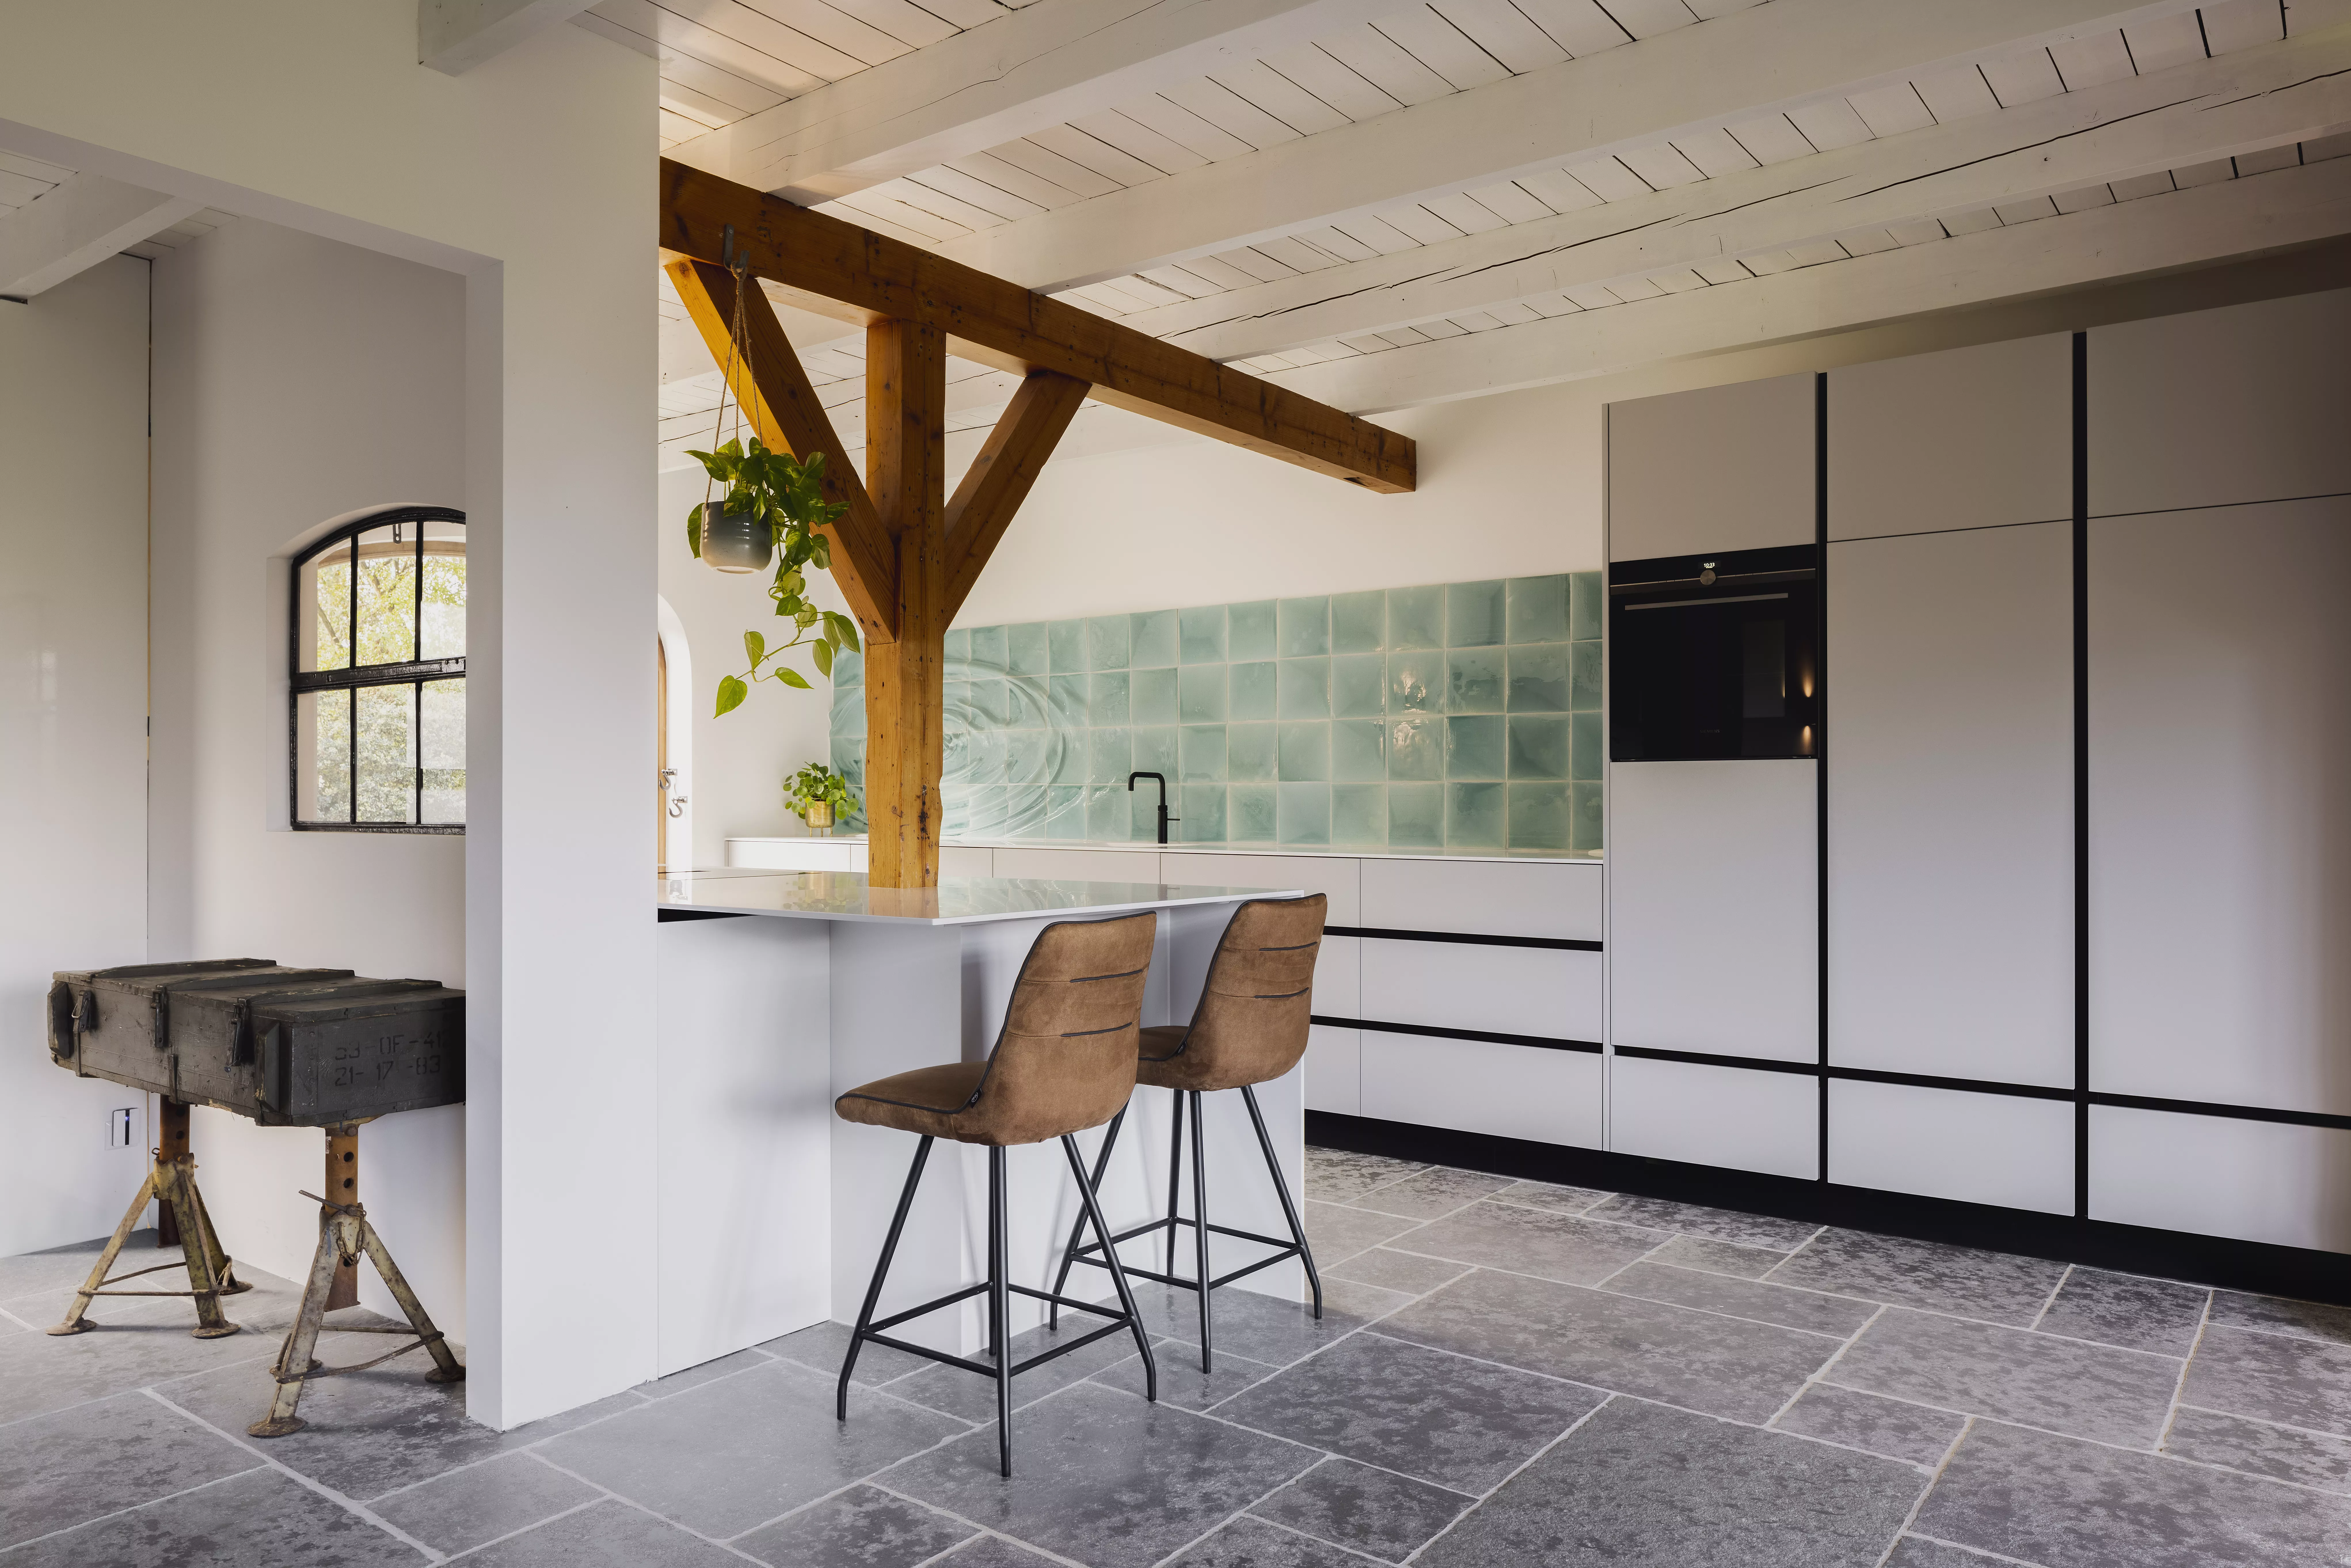 A kitchen uses HIMACS  to connect the past and the present 